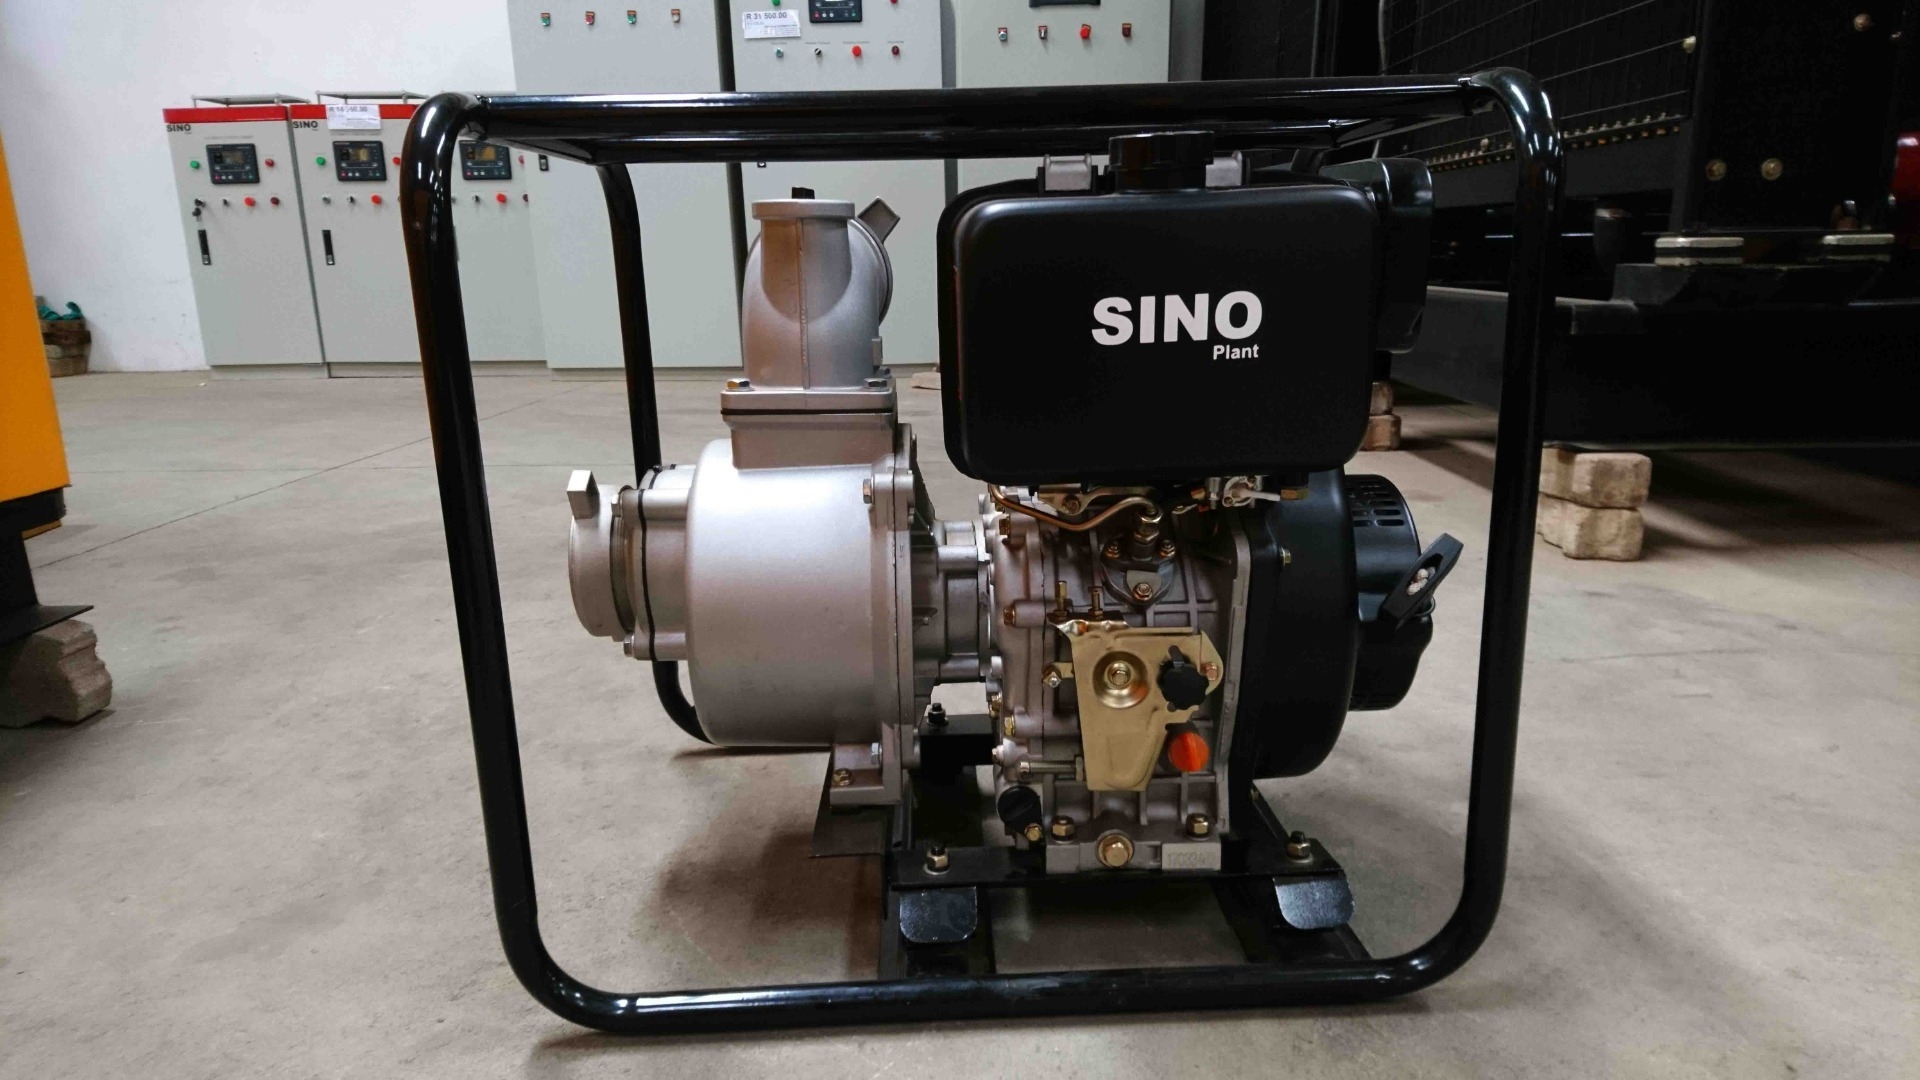 Sino Plant Water pumps 4" Diesel Water Pump 2022 for sale by Sino Plant | Truck & Trailer Marketplaces